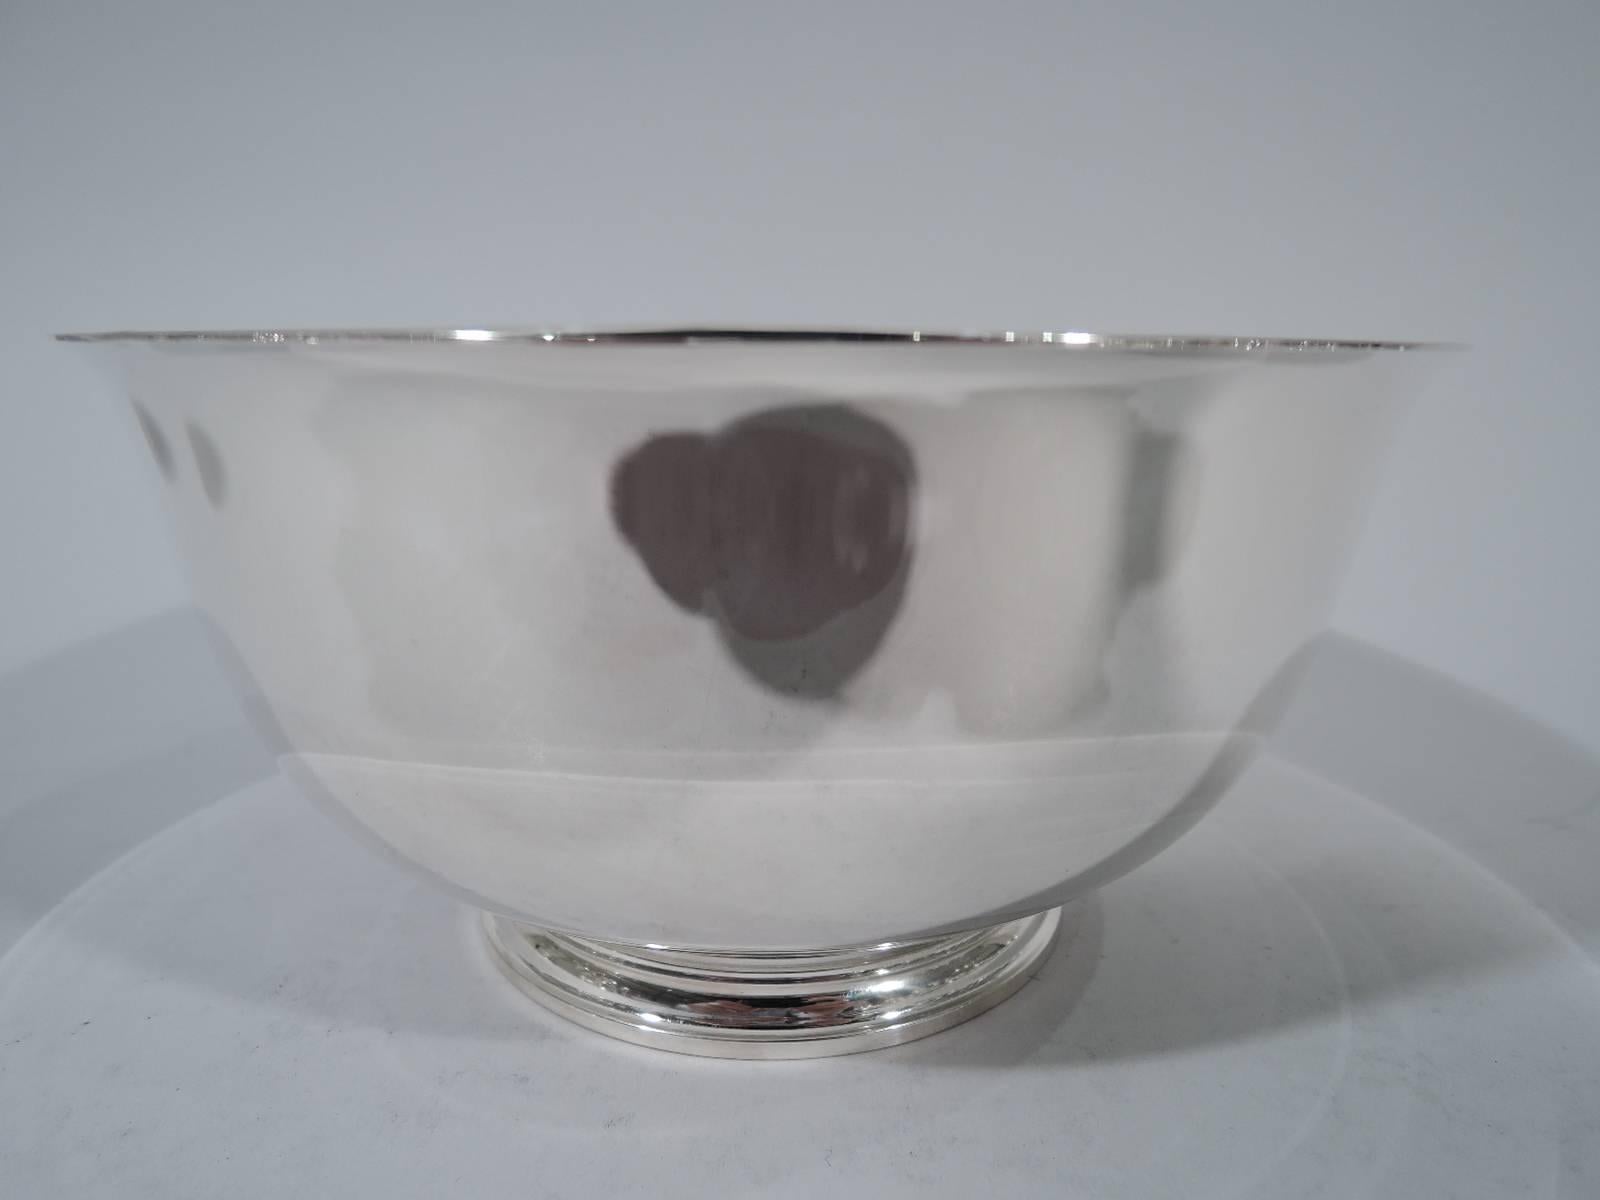 Sterling silver Revere bowl. Made by Tiffany & Co. in New York. Curved sides, flared rim, and stepped foot. A nice trophy with plenty of room for engraving. Hallmark includes postwar pattern no. 23616. Weight: 12.2 troy ounces.